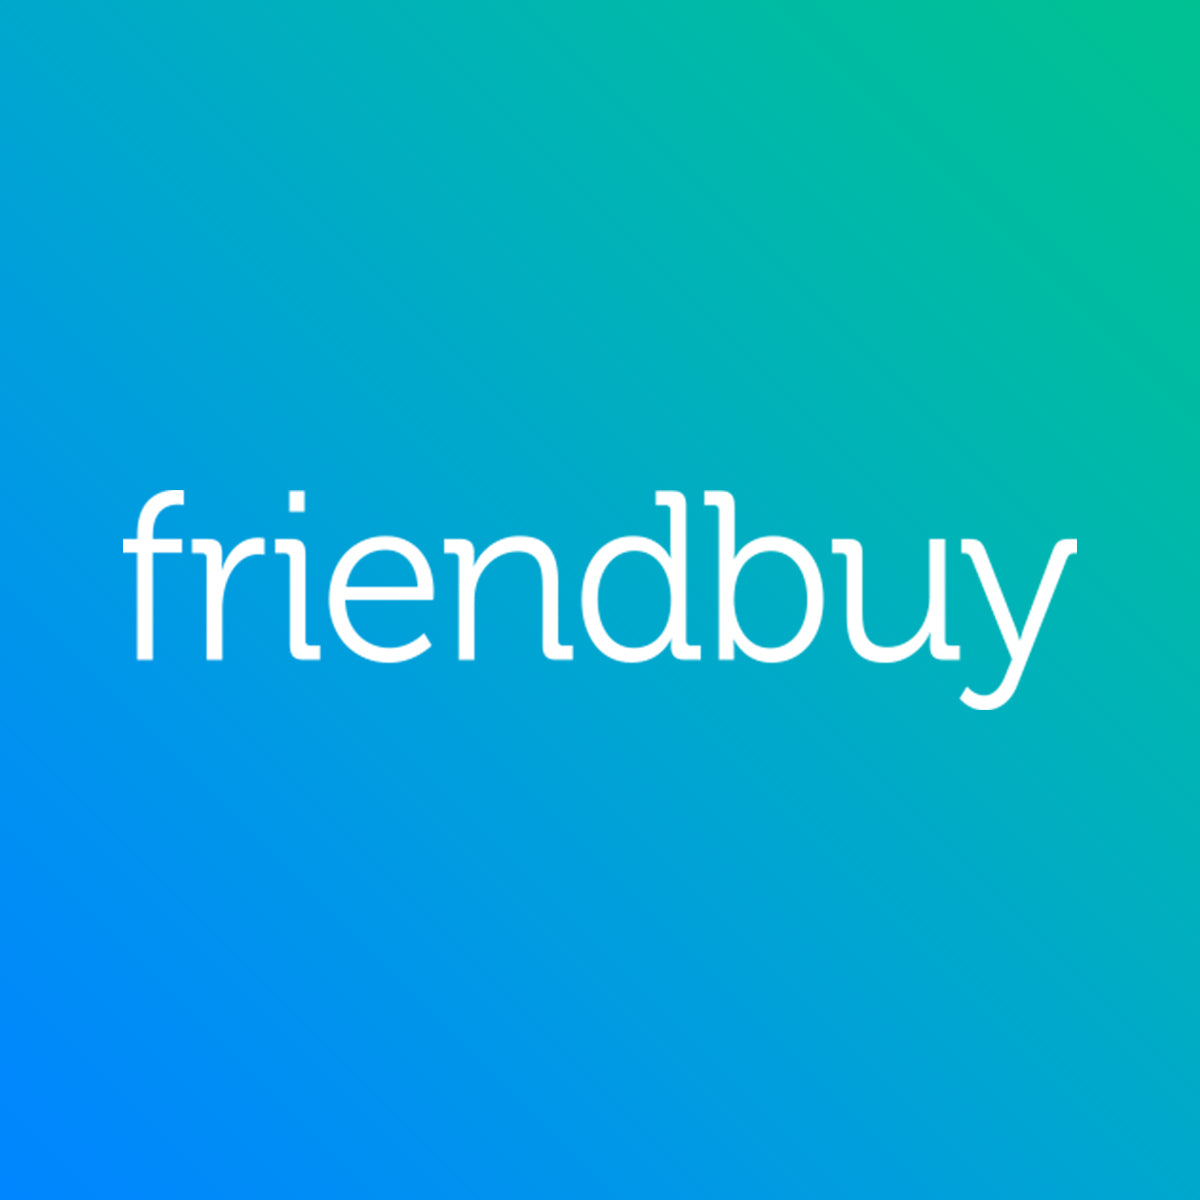 Hire Shopify Experts to integrate Friendbuy: Referrals & Loyalty app into a Shopify store